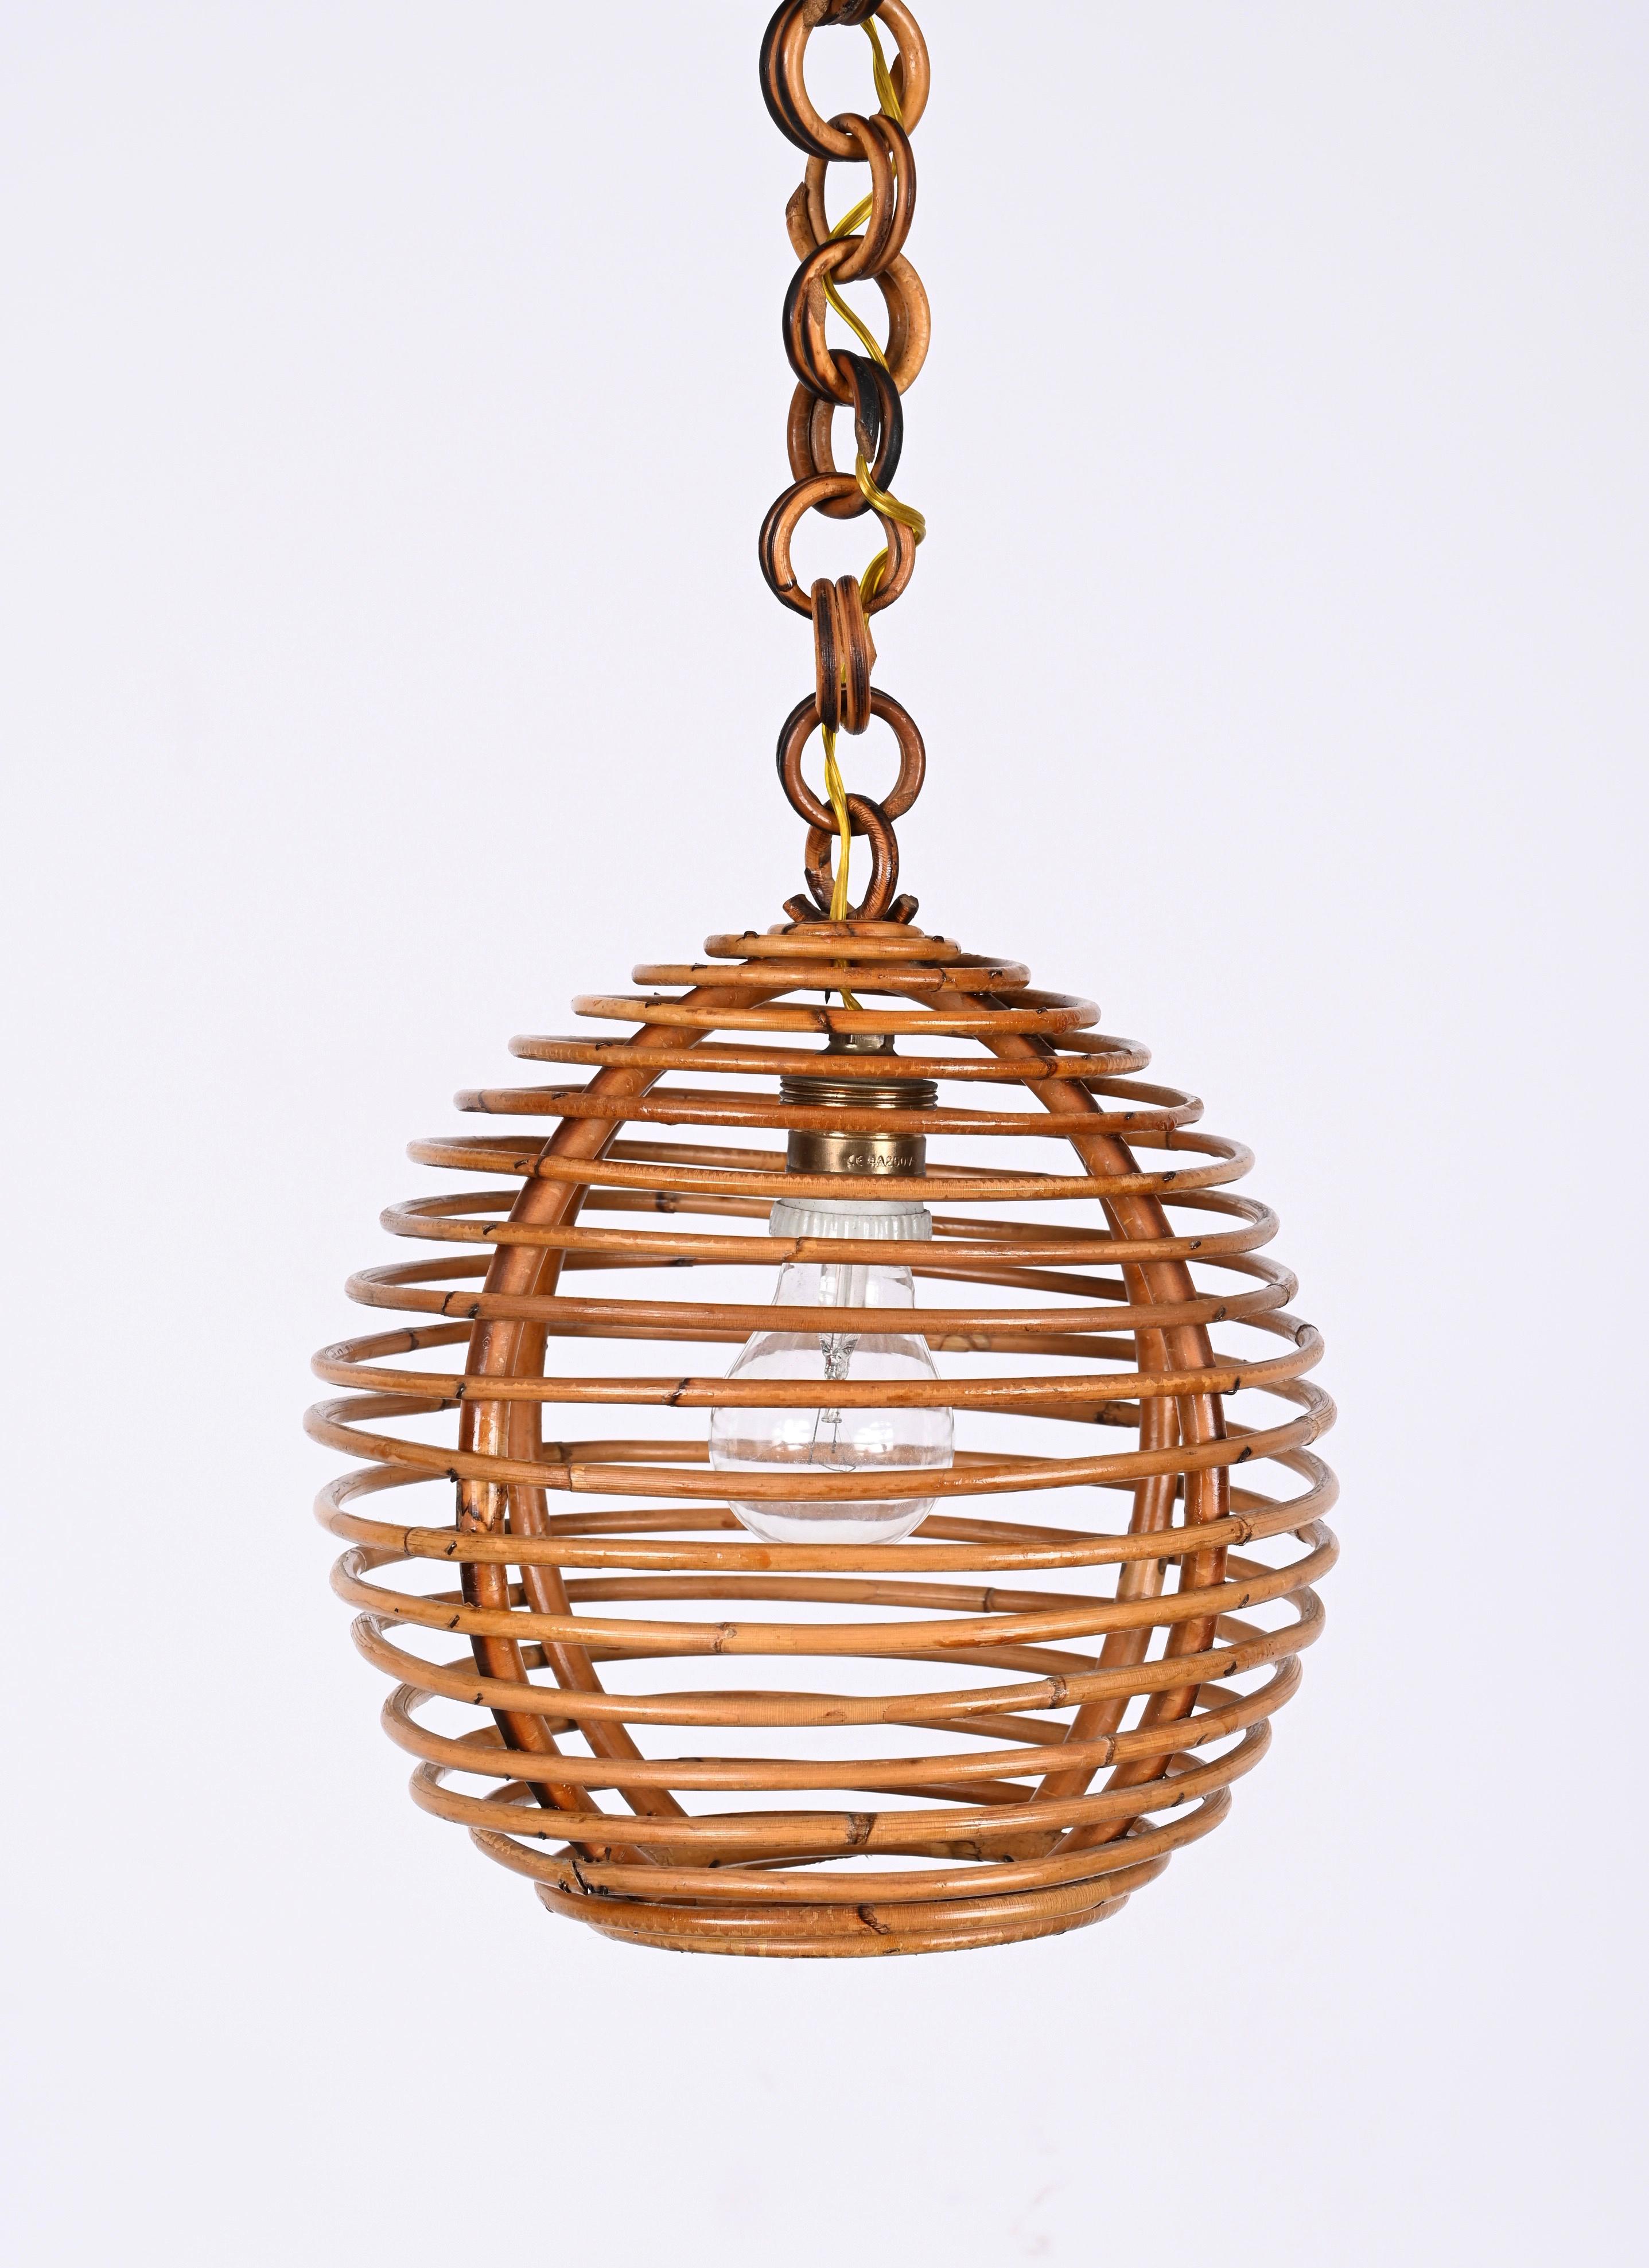 Midcentury French Riviera Bambo and Rattan Spherical Italian Chandelier, 1960s For Sale 10